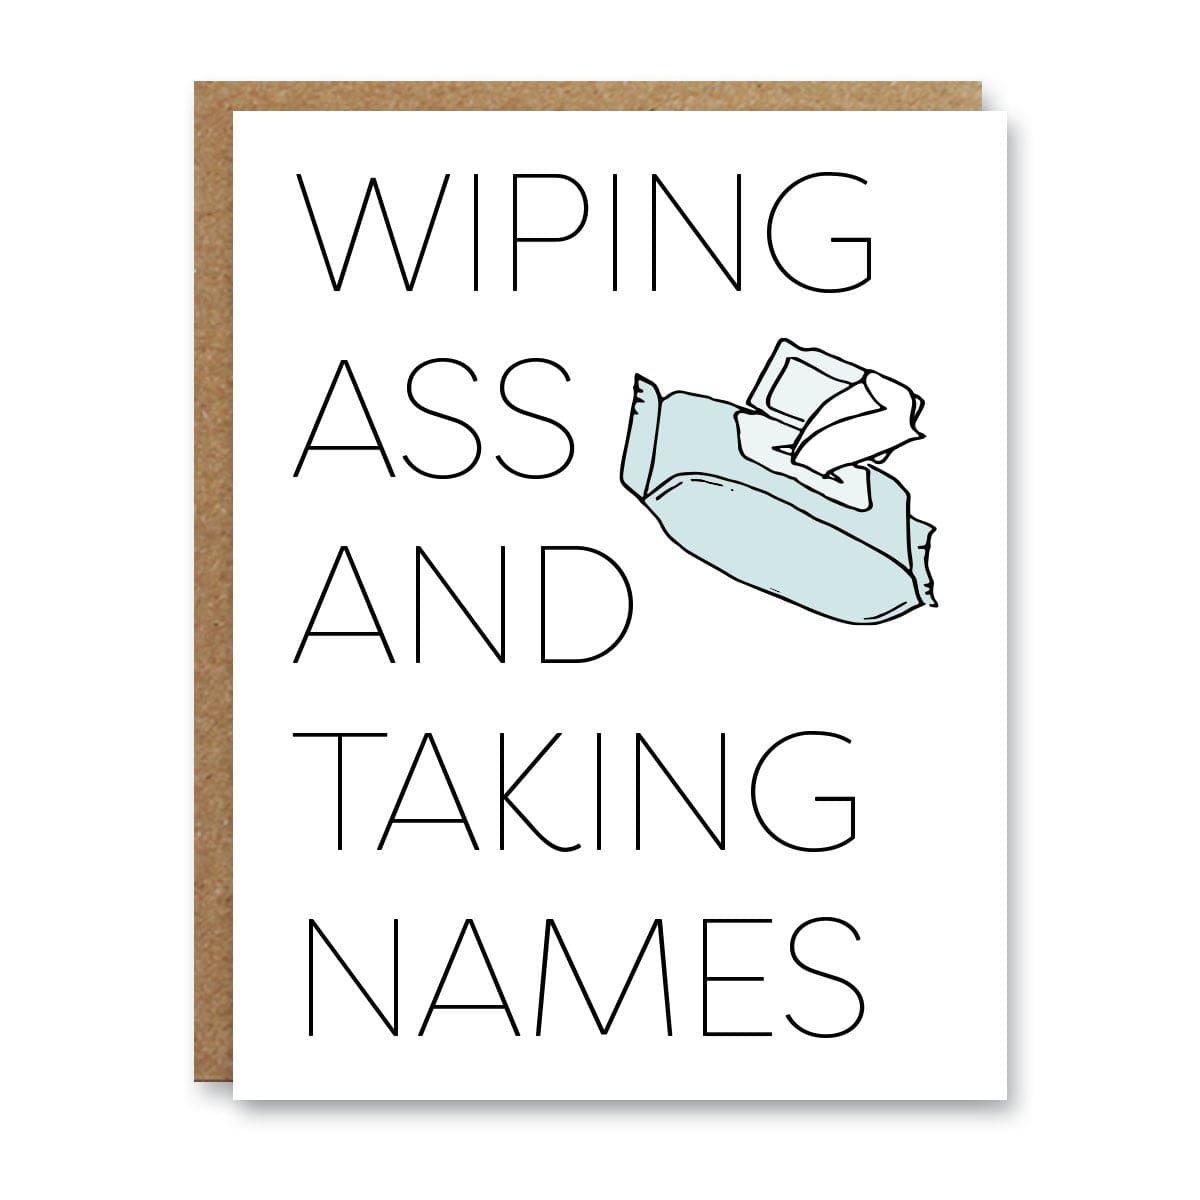 Boo To You Greeting Cards greeting card Boo To You 'Wiping Ass and Taking Names' Greeting Card